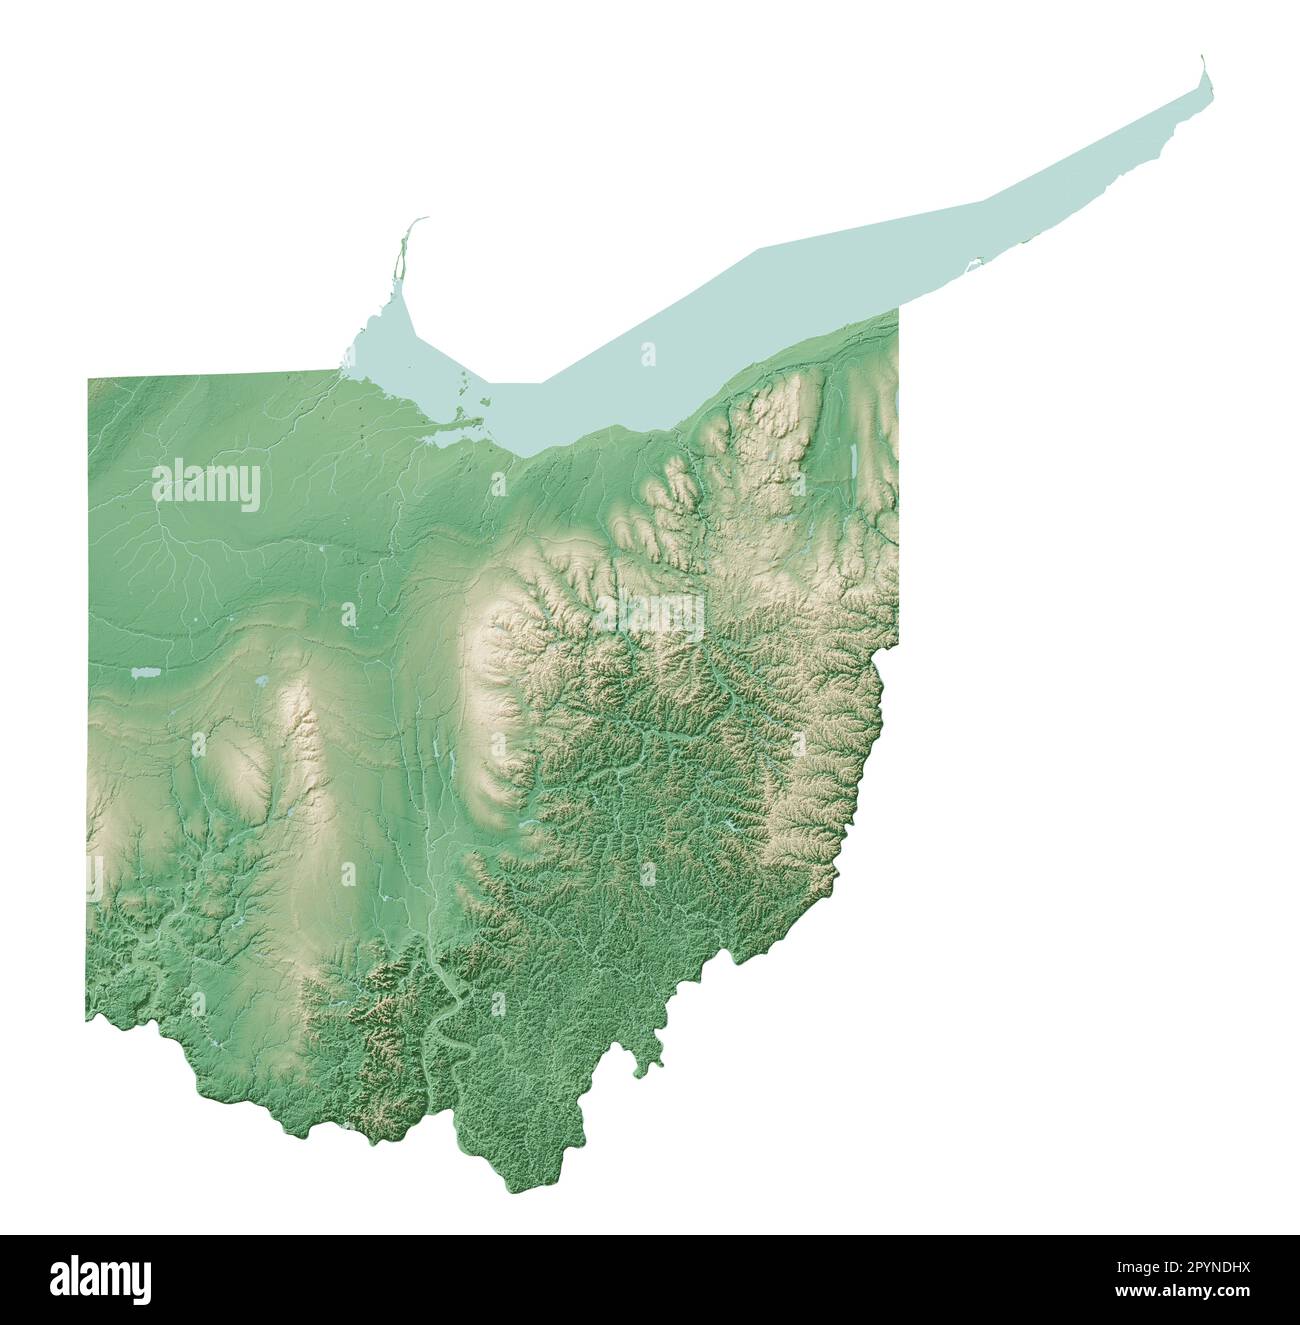 The US state of Ohio. Highly detailed 3D rendering of shaded relief map with rivers and lakes. Colored by elevation. Created with satellite data. Stock Photo